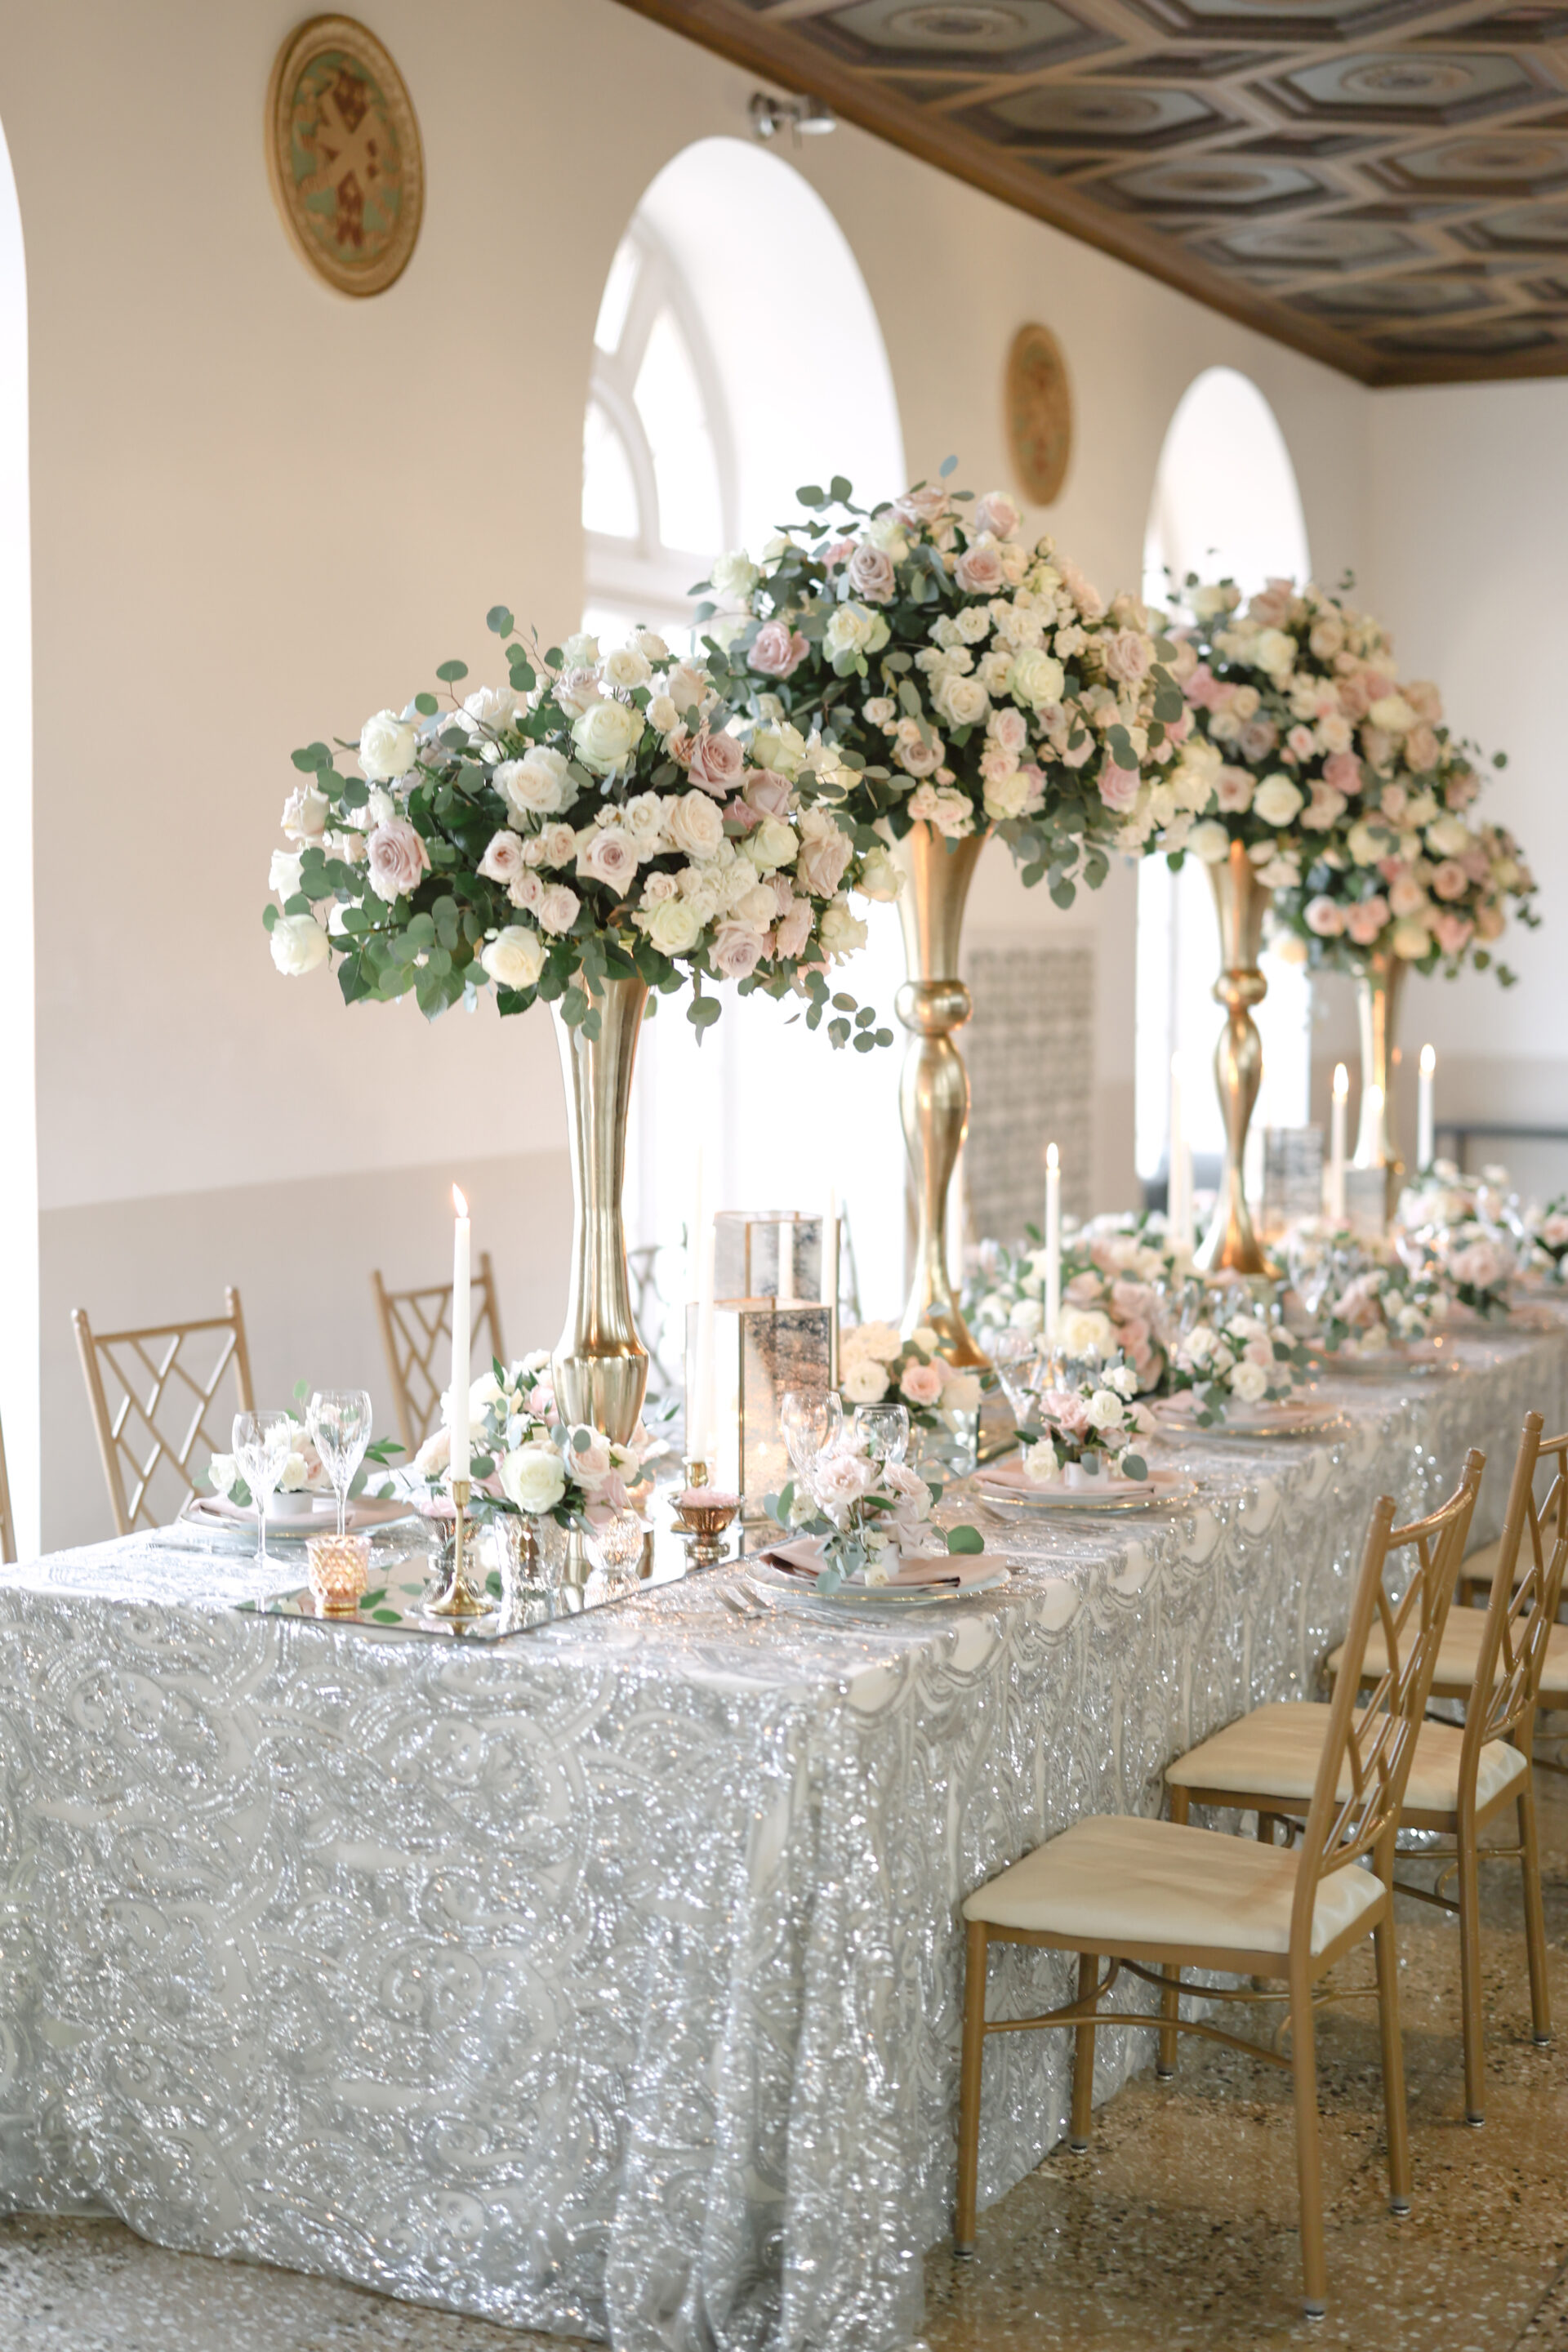 Silver-themed head wedding table with extravagant boquets in gold vases